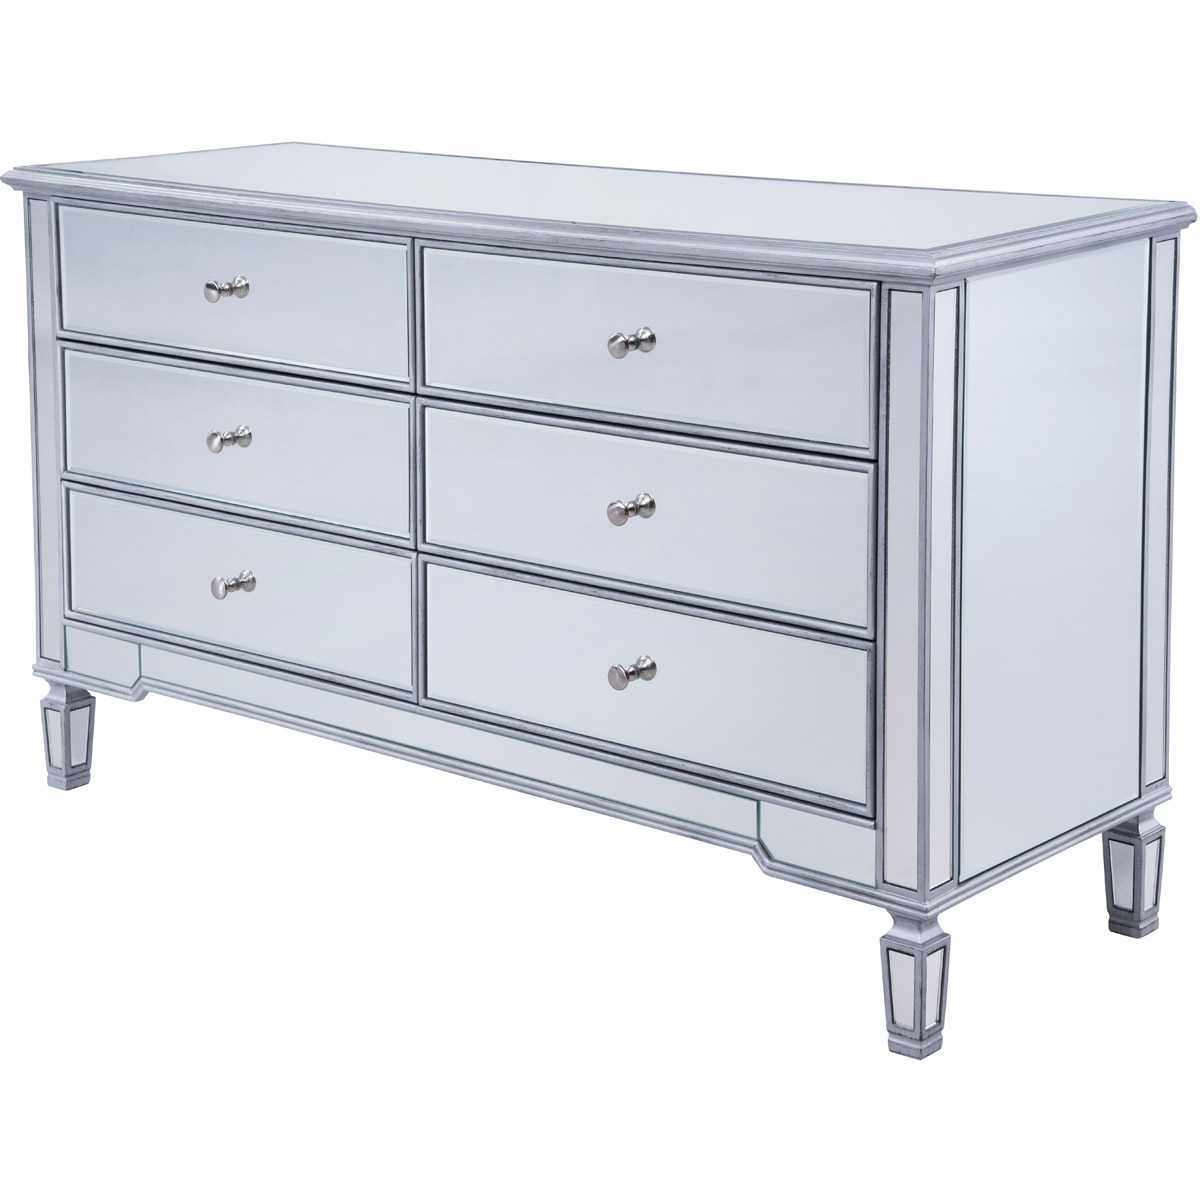 Mf6-1036s 6 Drawers Cabinet Silver Paint - Hand Rubbed Antique Silver - 60 X 20 X 34 In.